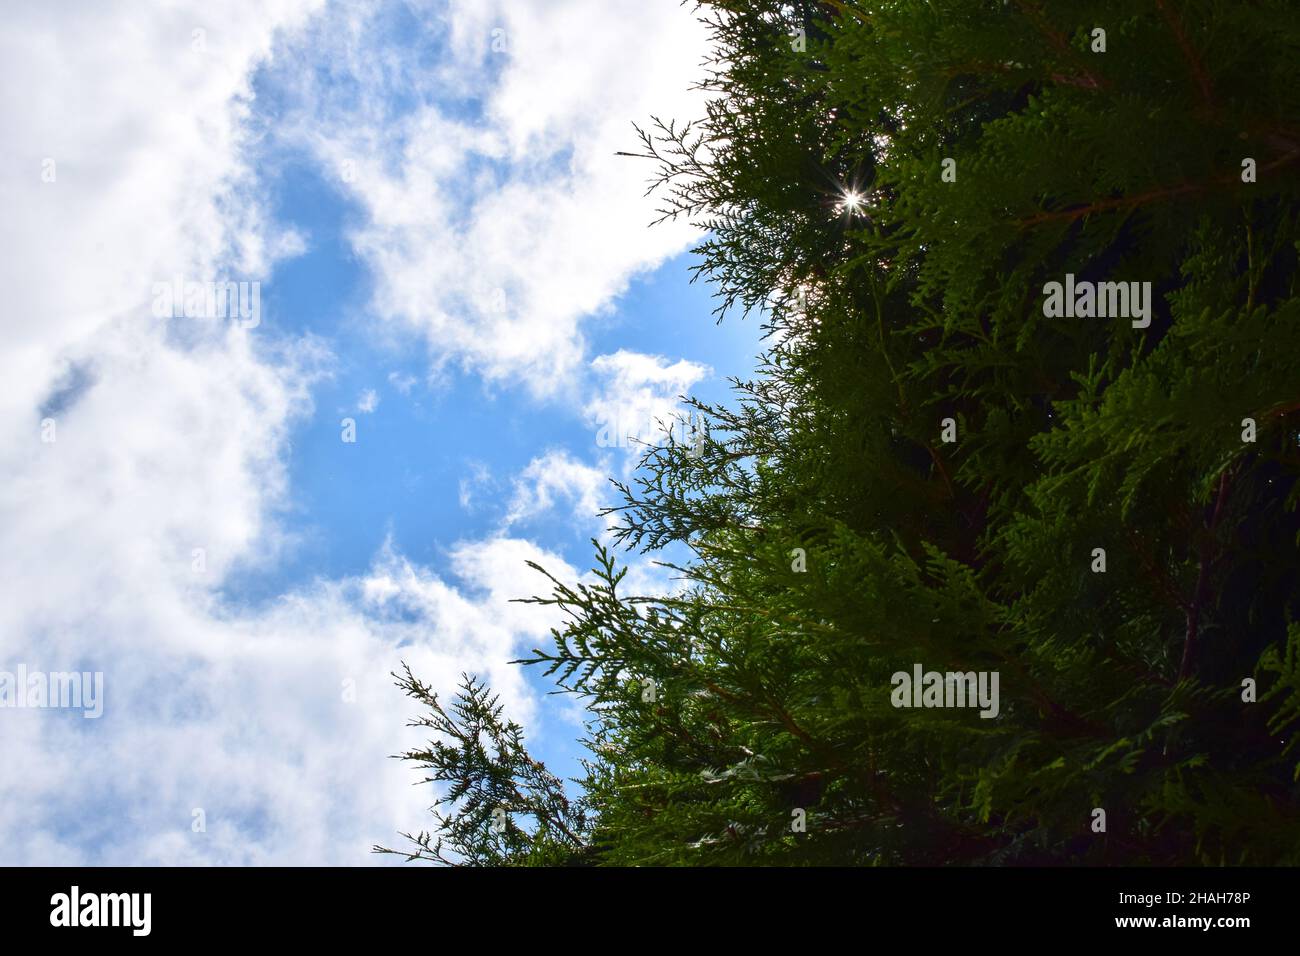 On the right side of the frame there are dense branches of a fence made of thuja shrubs, and on the left there is a bright blue sky with clouds Stock Photo